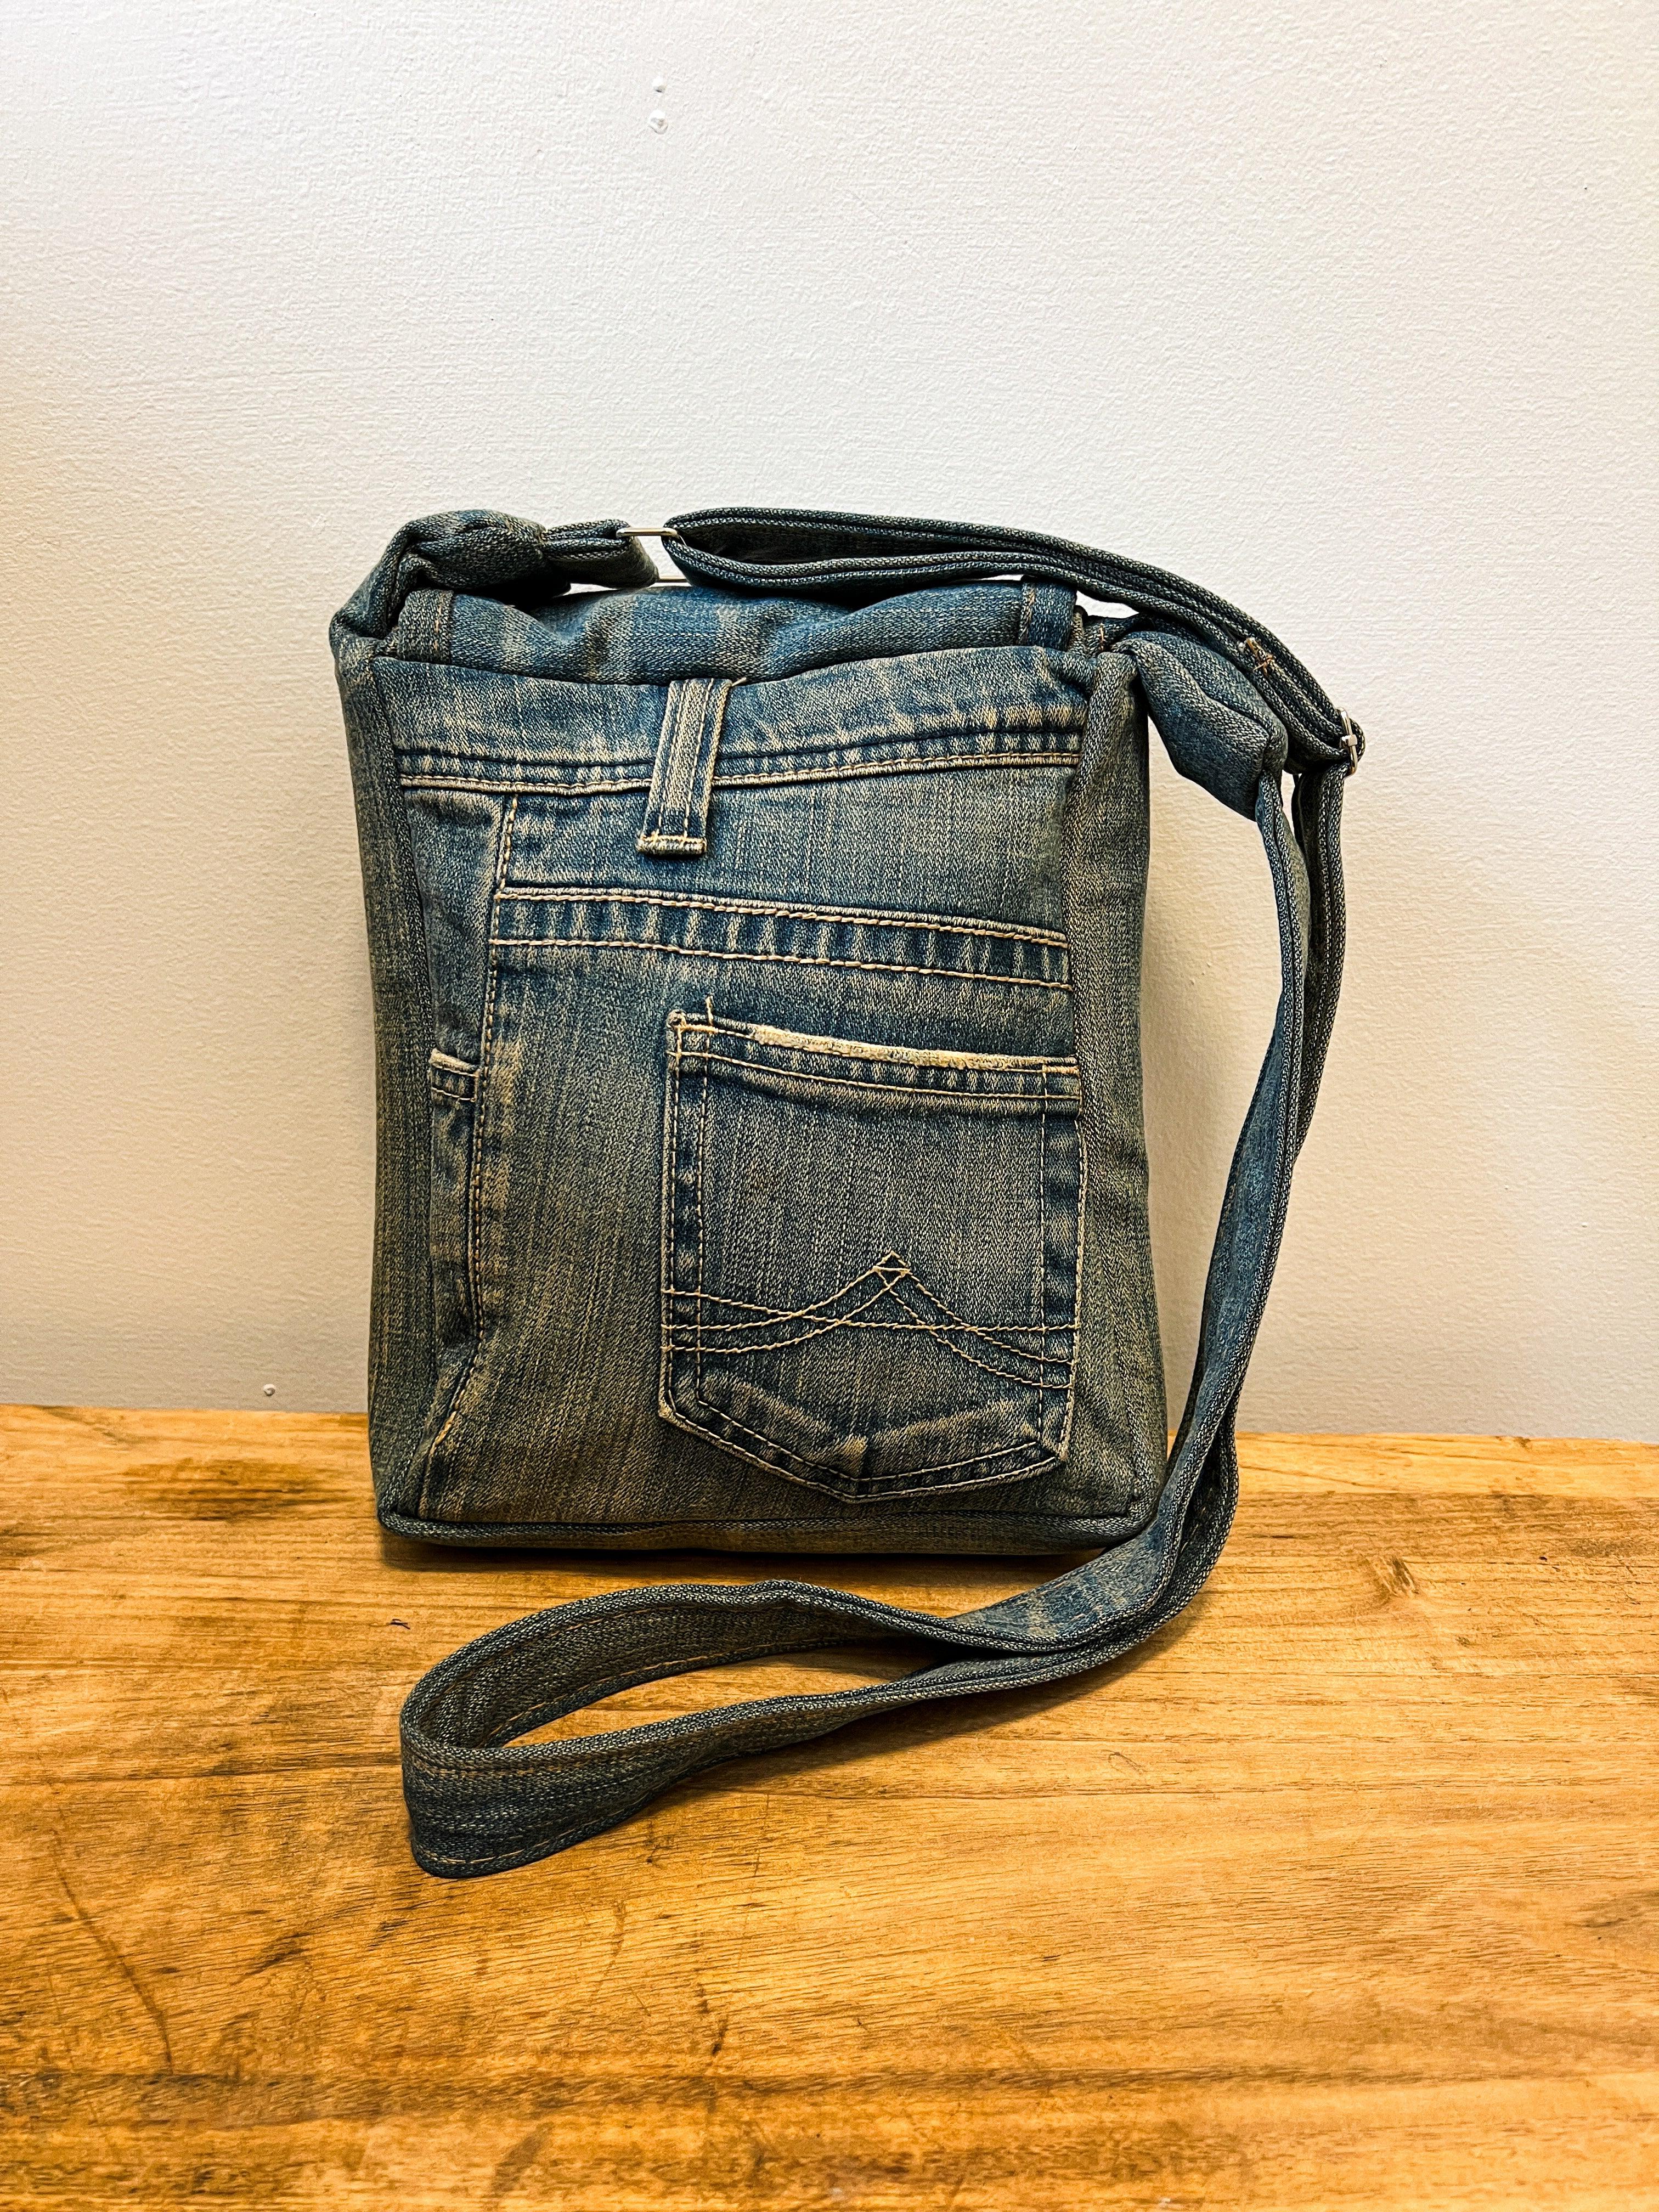 SALE. Upcycled jeans, eco friendly bag, purse. Ladies denim bag, hand  finished, denim, decorated. Lined, with lots of pockets. – Tilly Lane  Treasures.